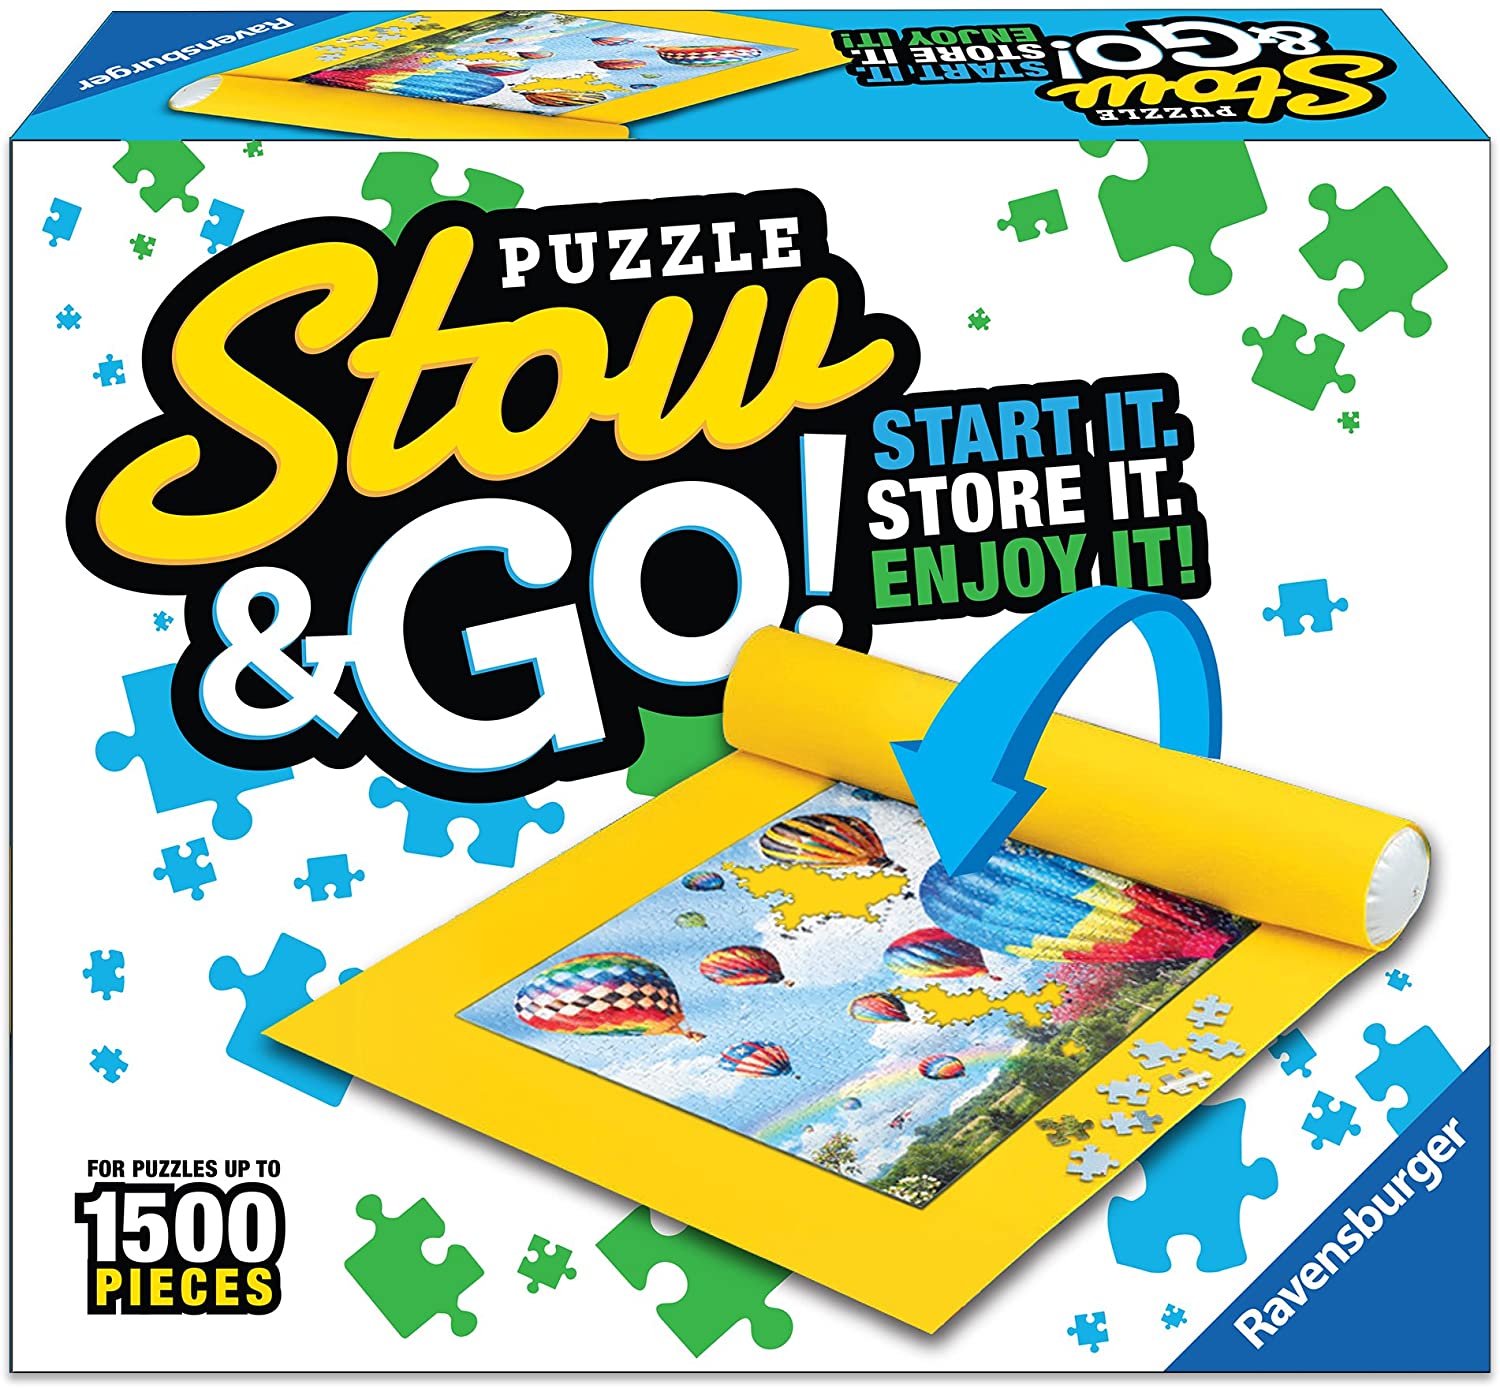 Puzzle Stow & Go- Holds 1,500 Pieces by Ravensburger #17968